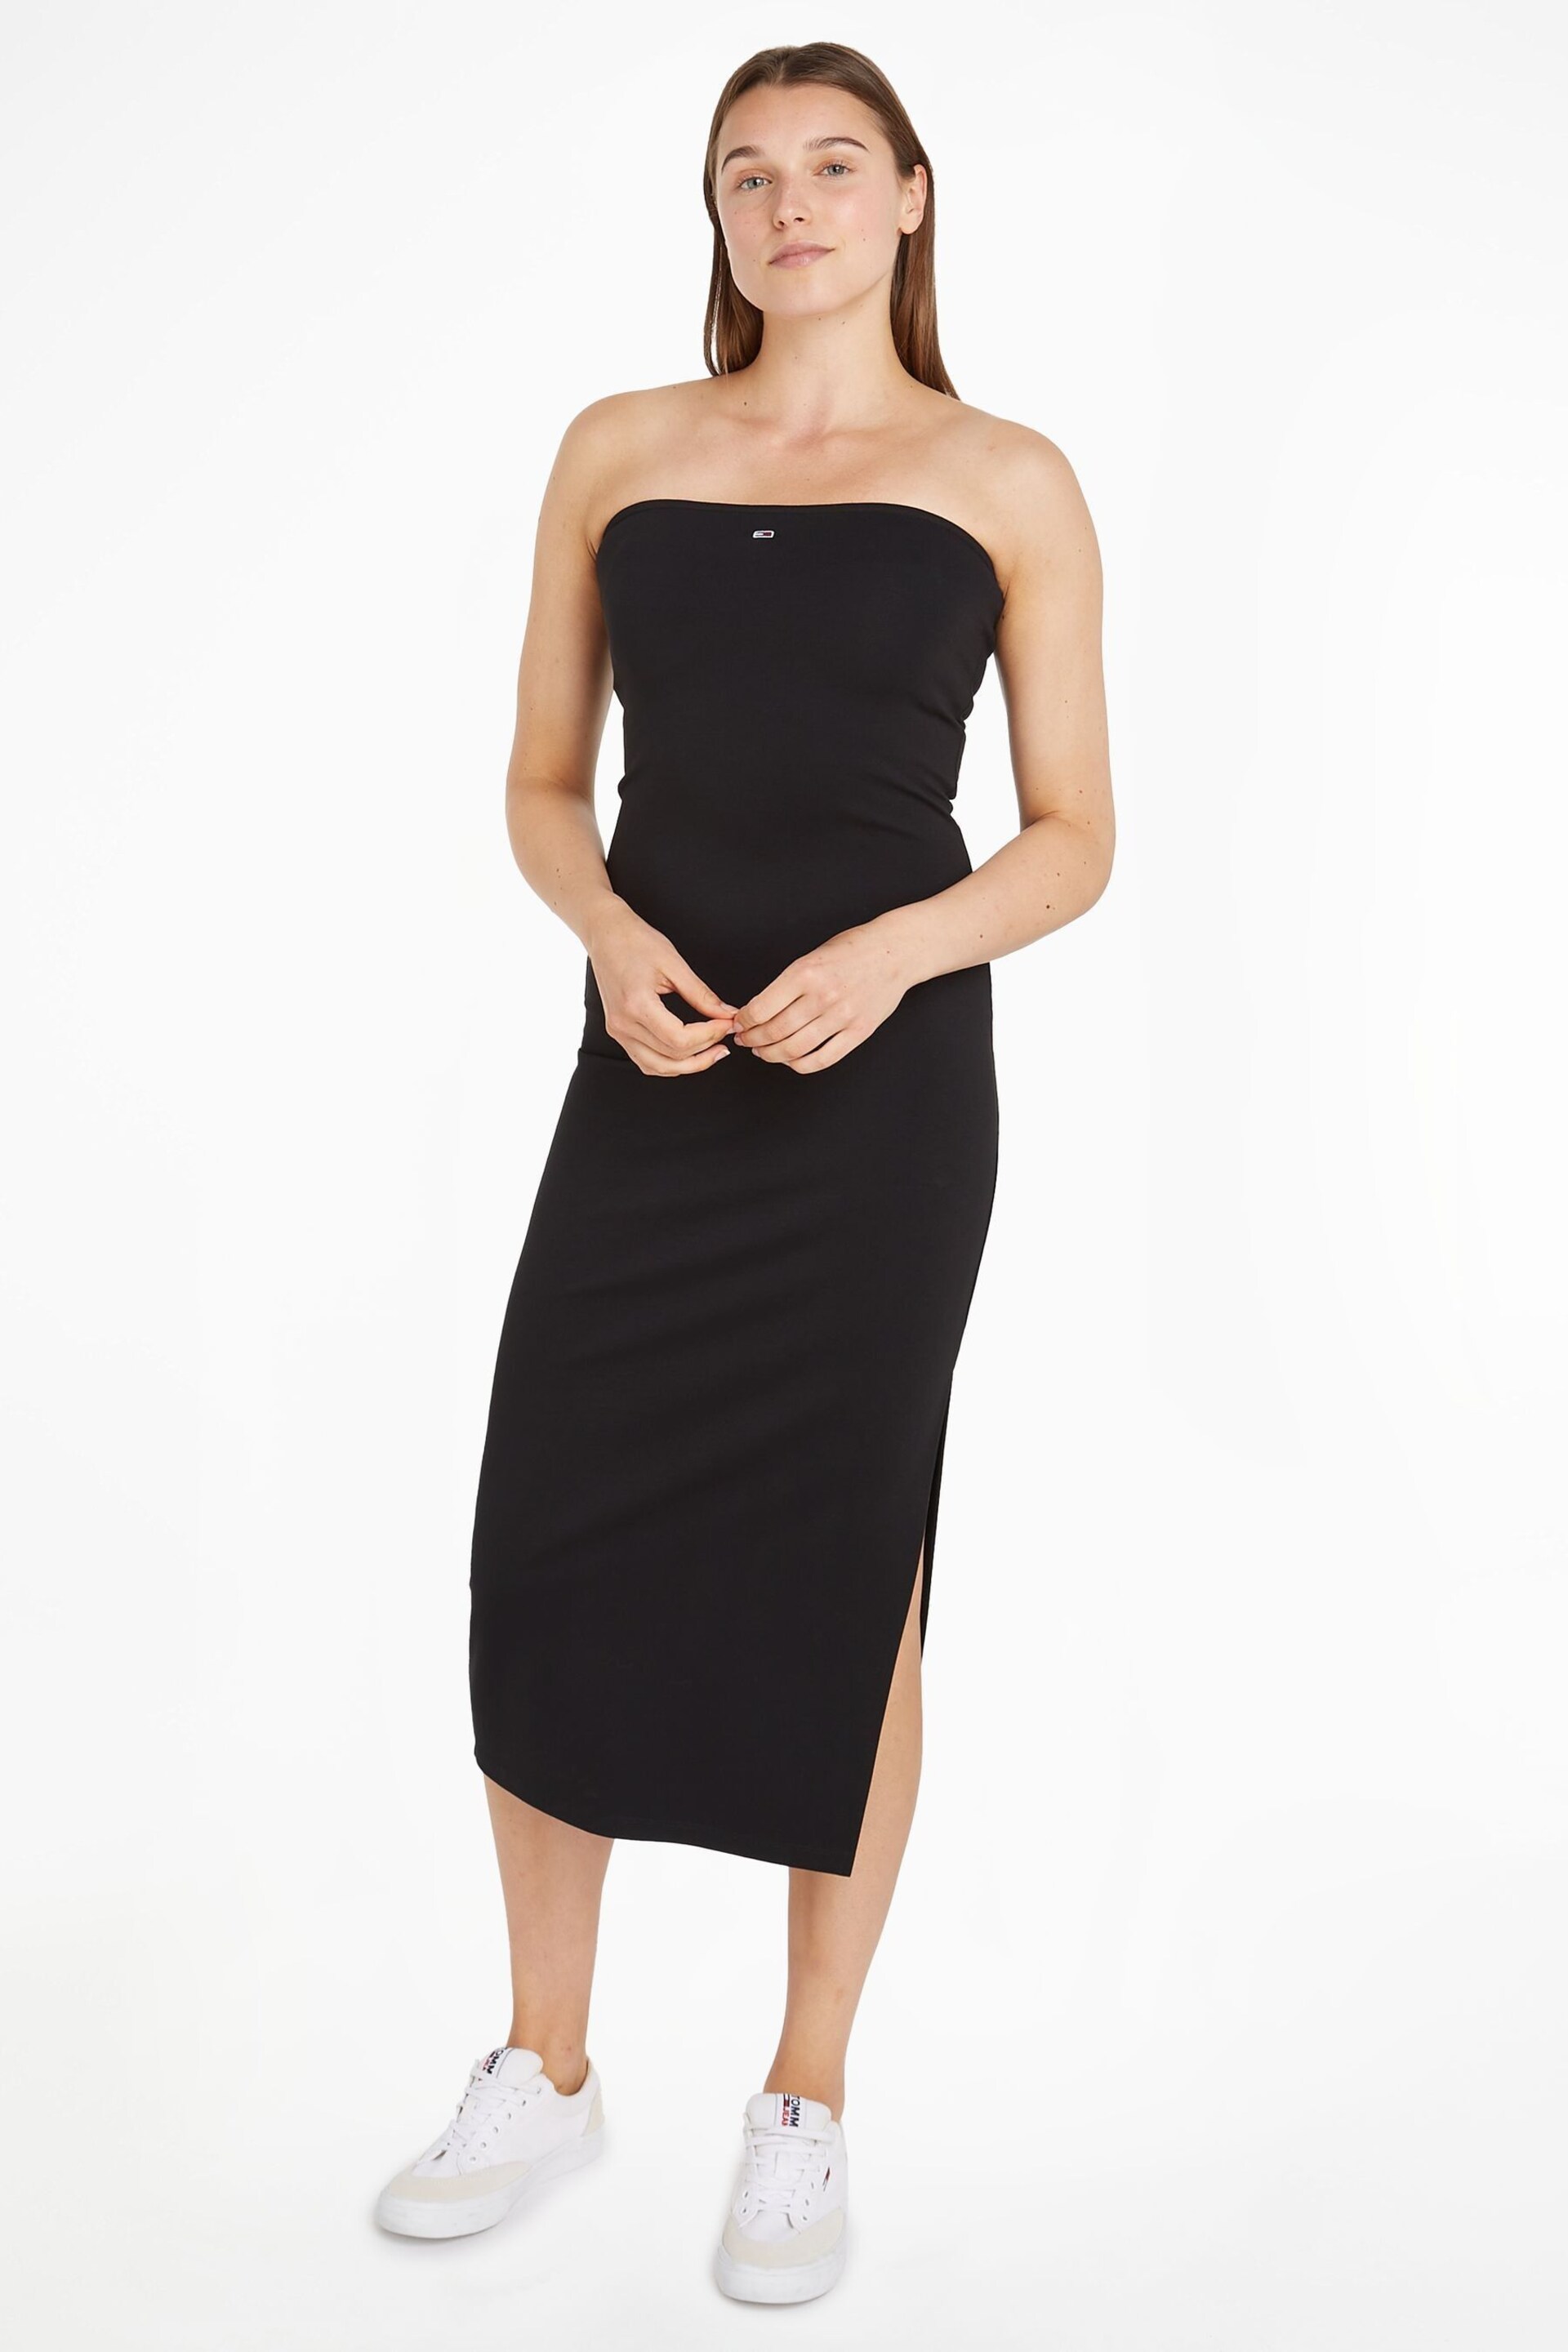 Tommy Jeans Midi Bodycon Tube Black Dress - Image 1 of 6